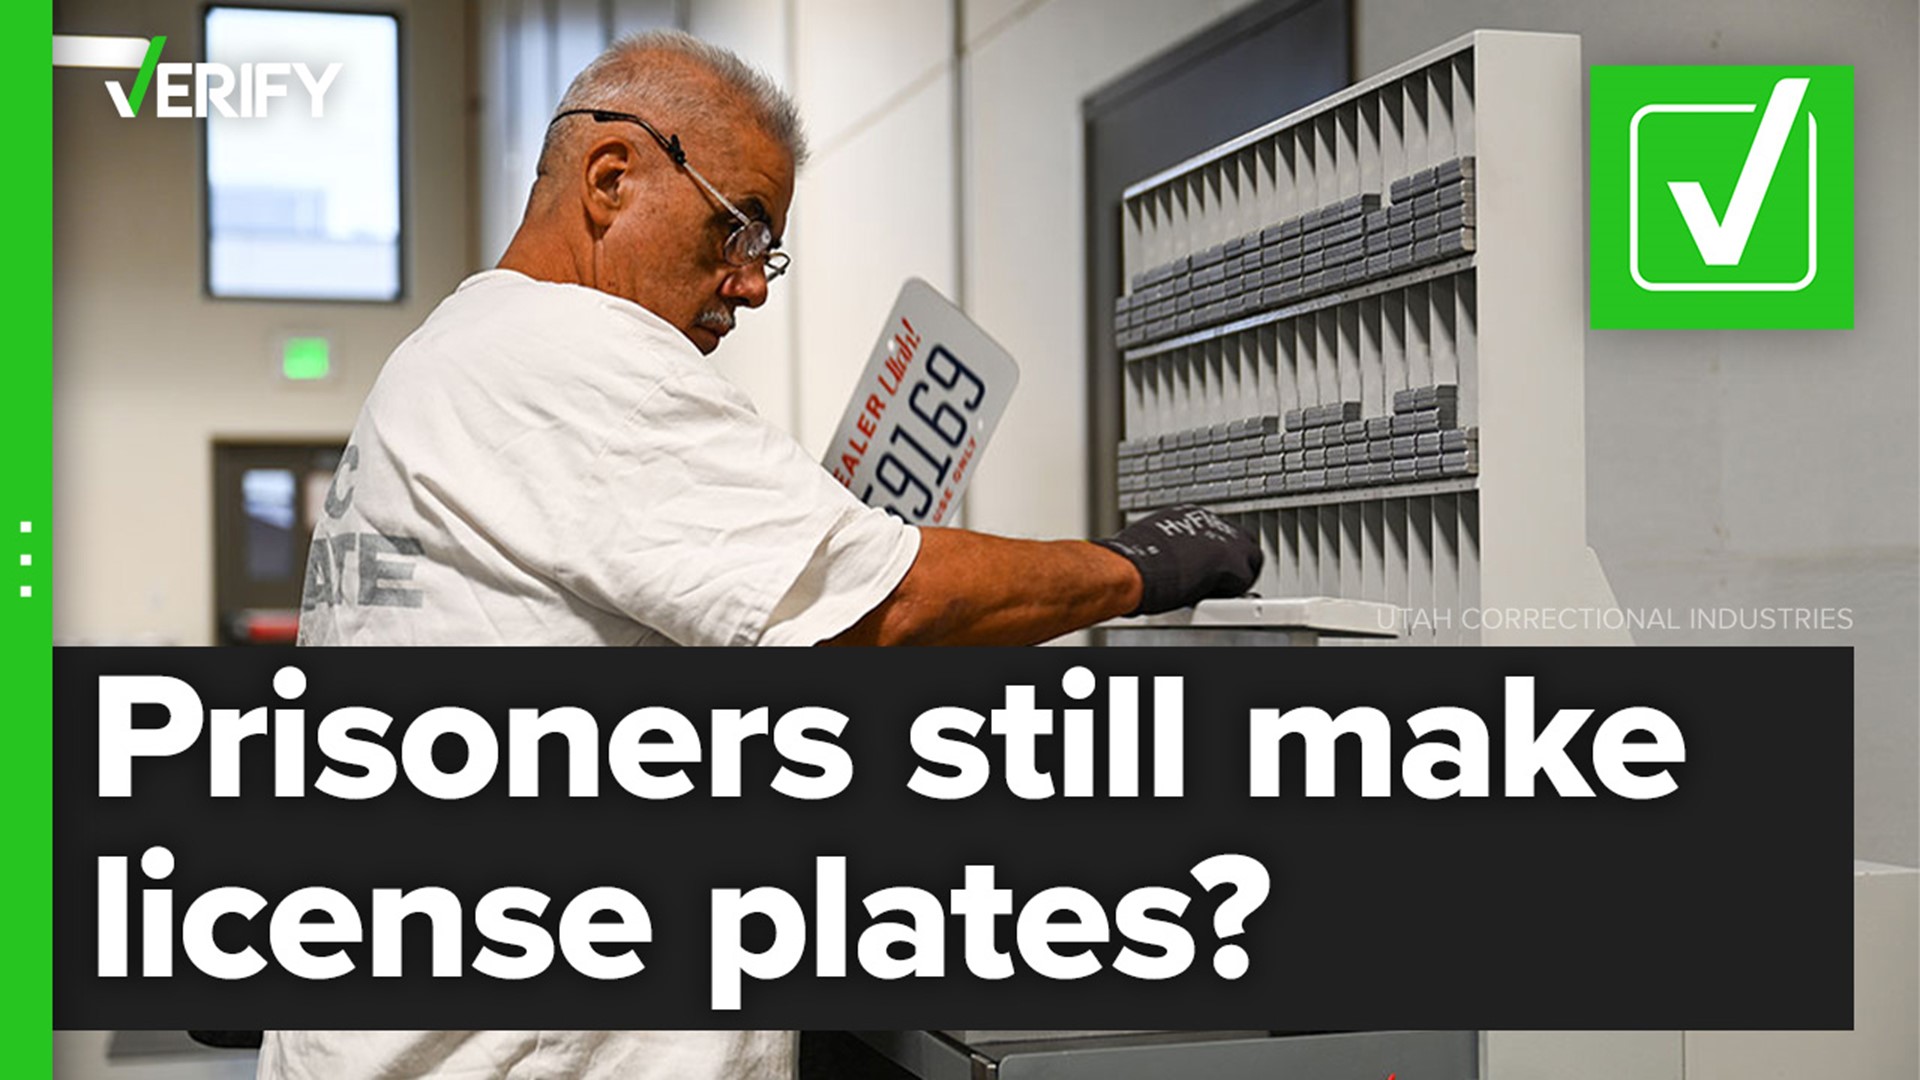 Inmates have produced license plates as part of prison labor programs for more than 100 years, and continue to do so in many U.S. states.